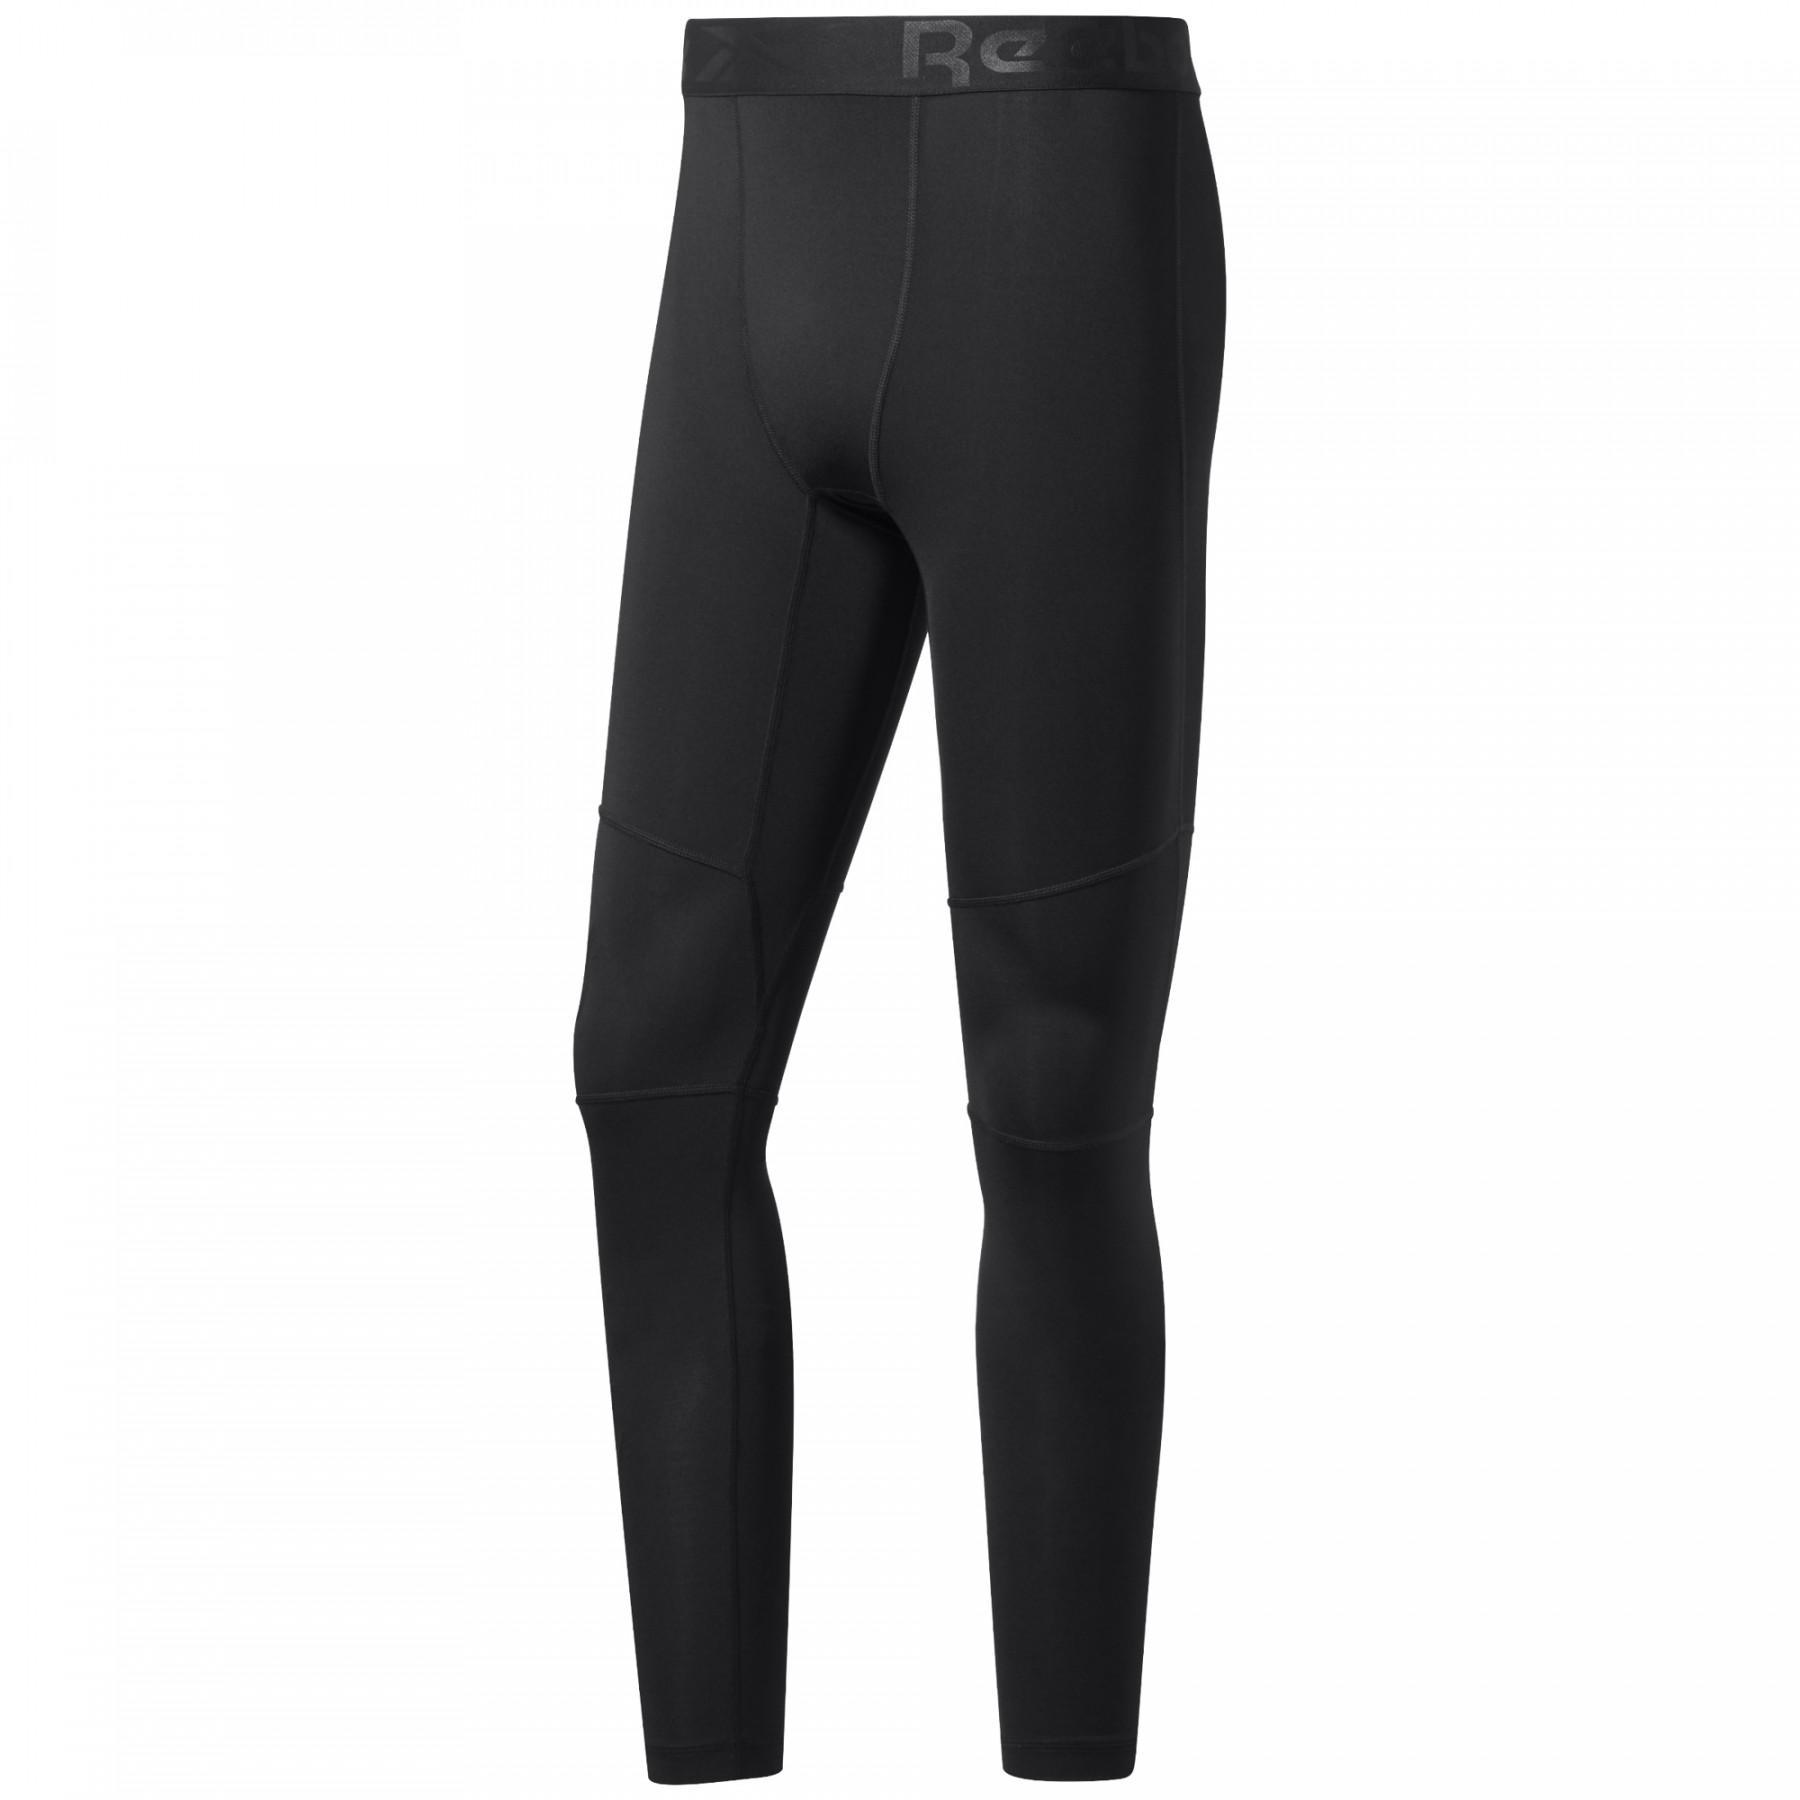 Compression tights Reebok Workout Ready